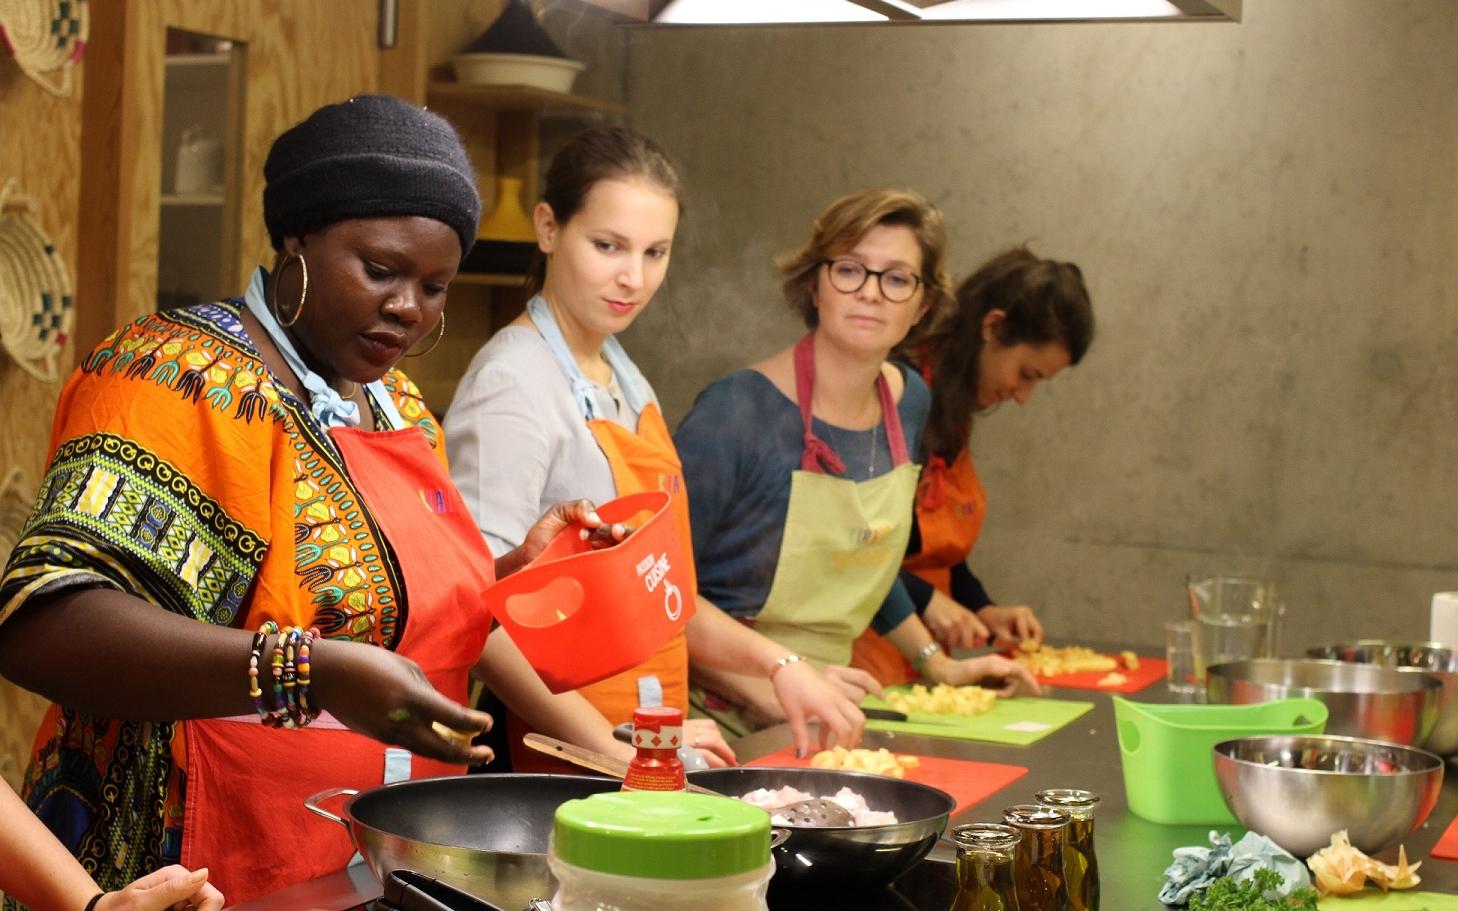 Cooking workshops of the world in Paris!